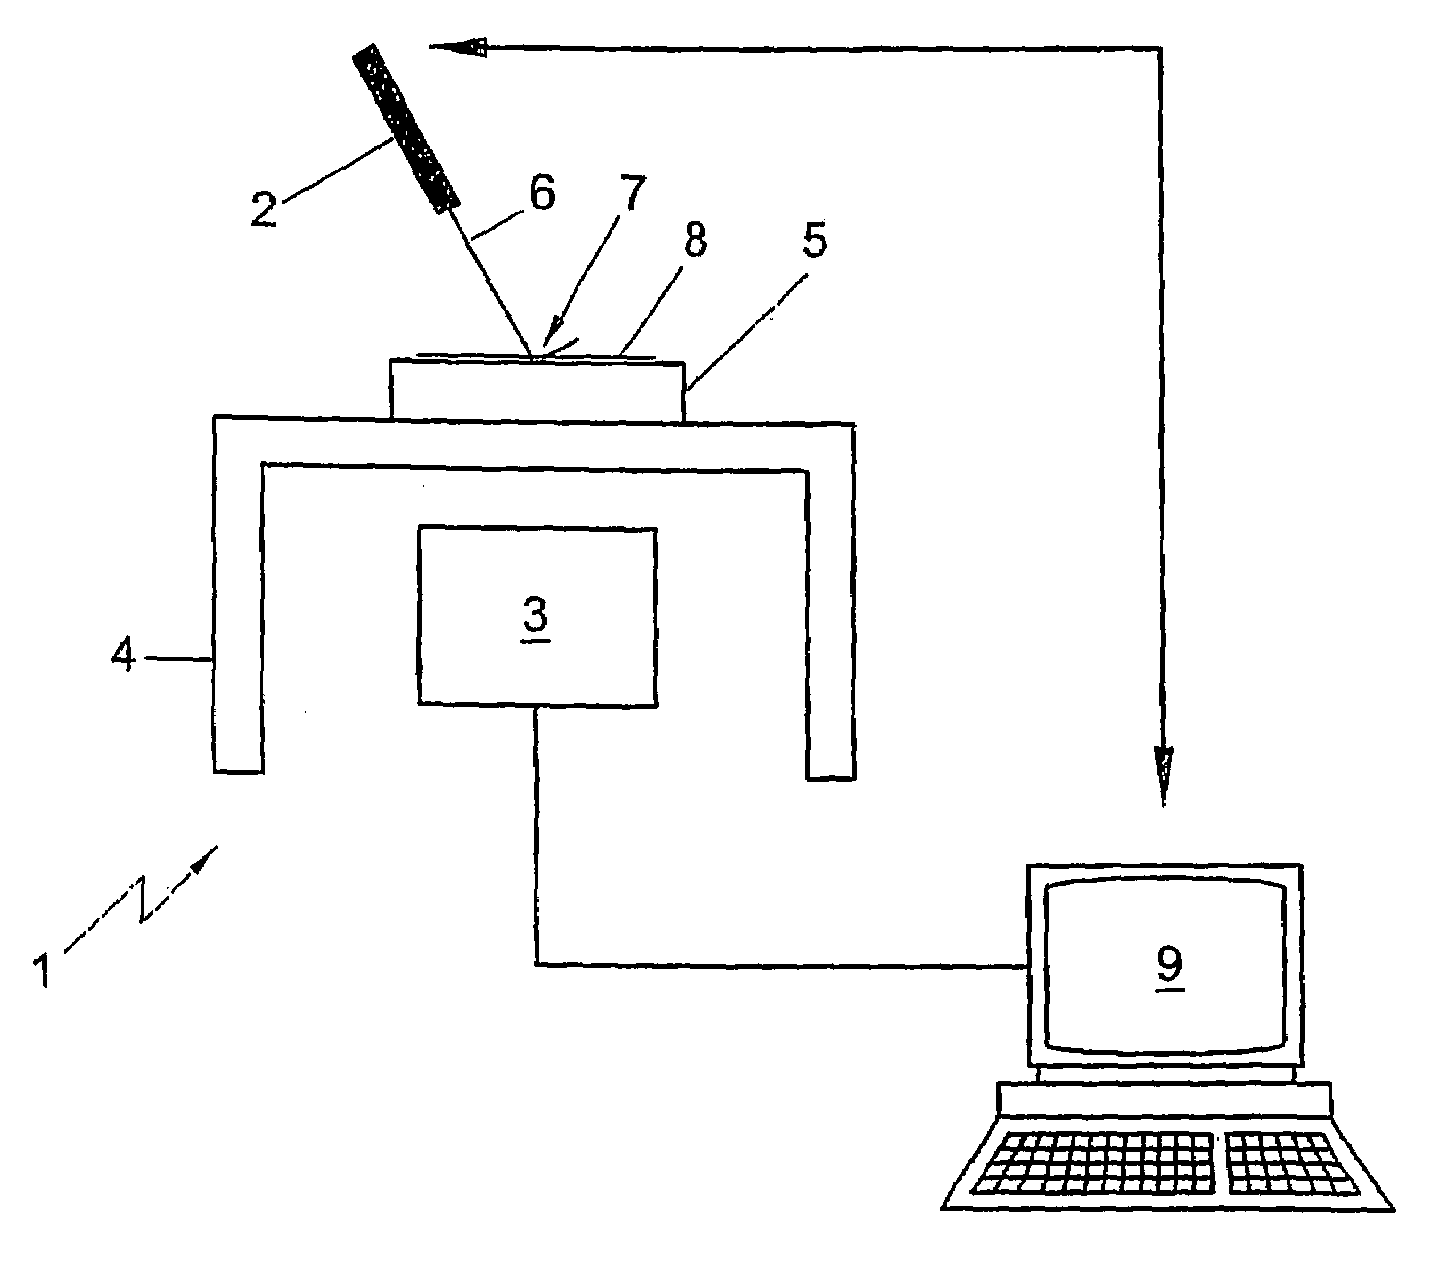 Method and apparatus for polishing a workpiece surface